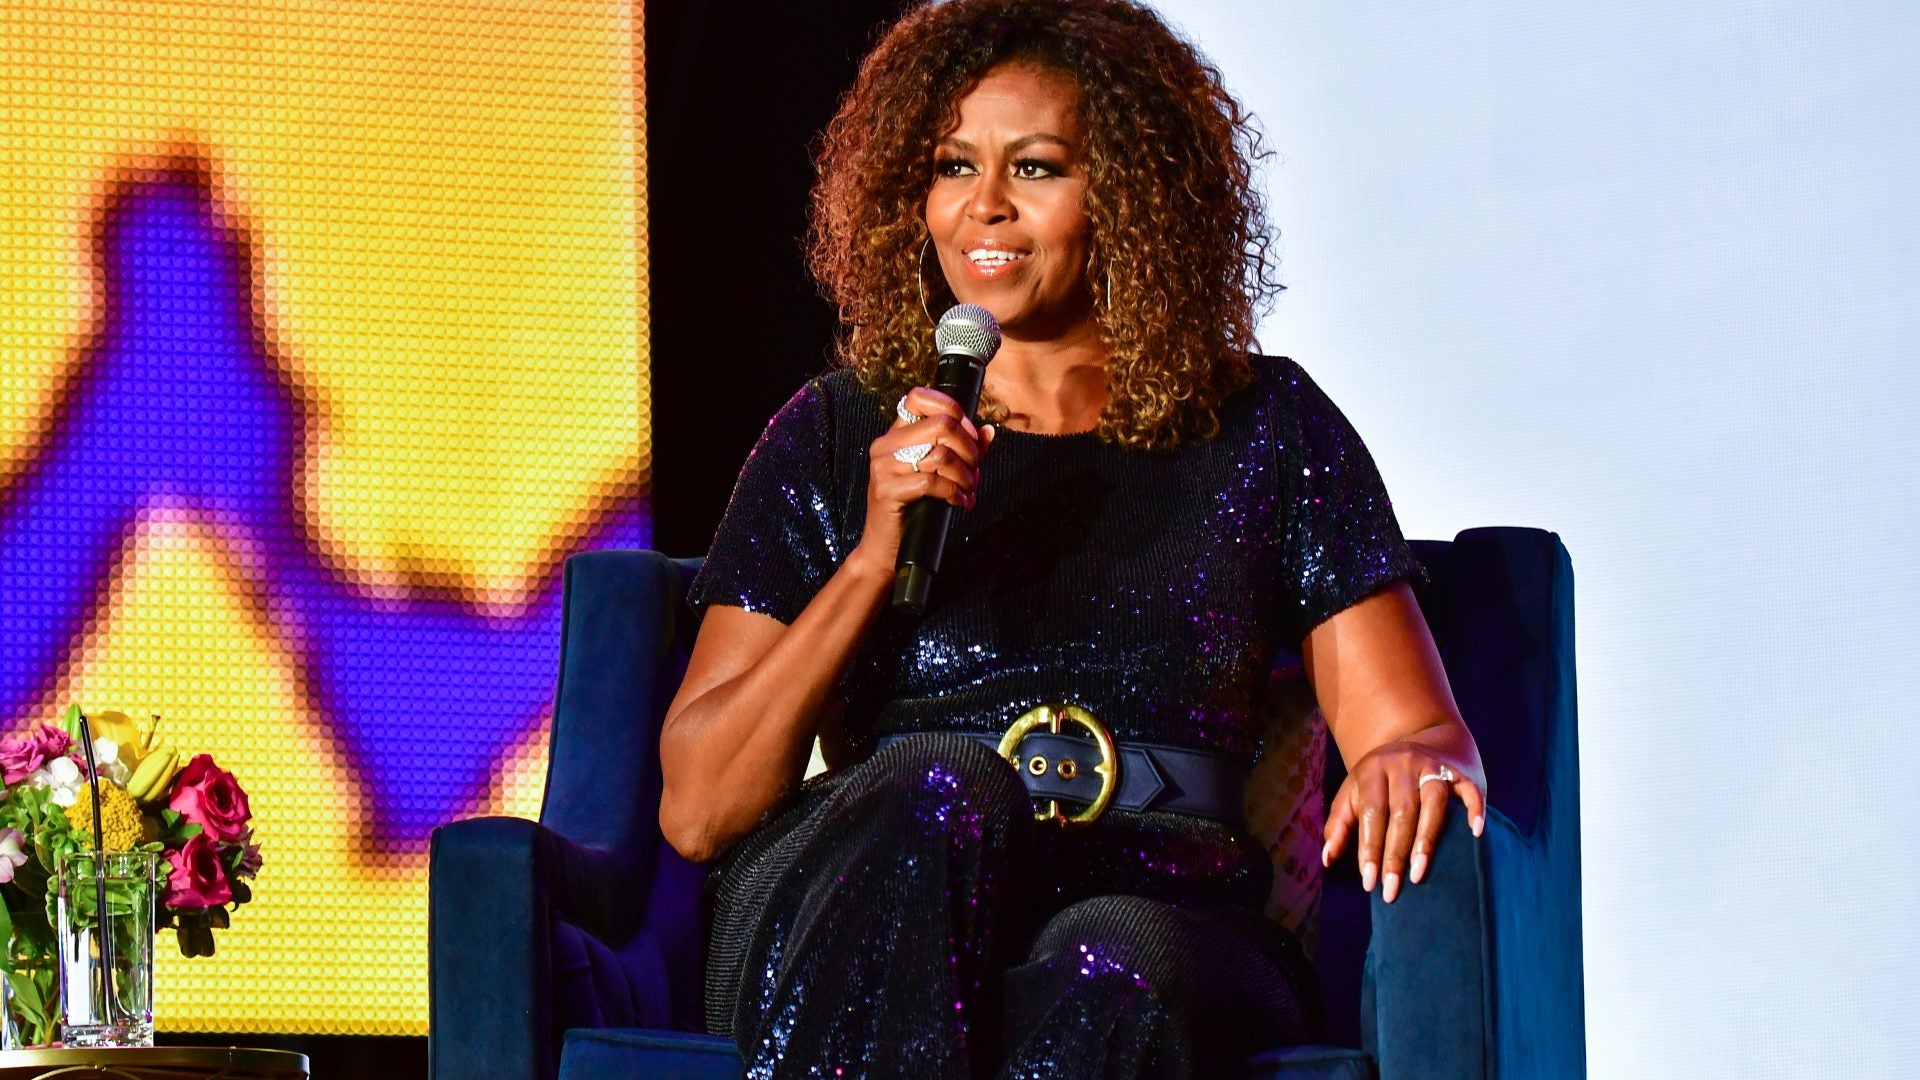 Michelle Obama Will Be Inducted Into National Women’s Hall of Fame